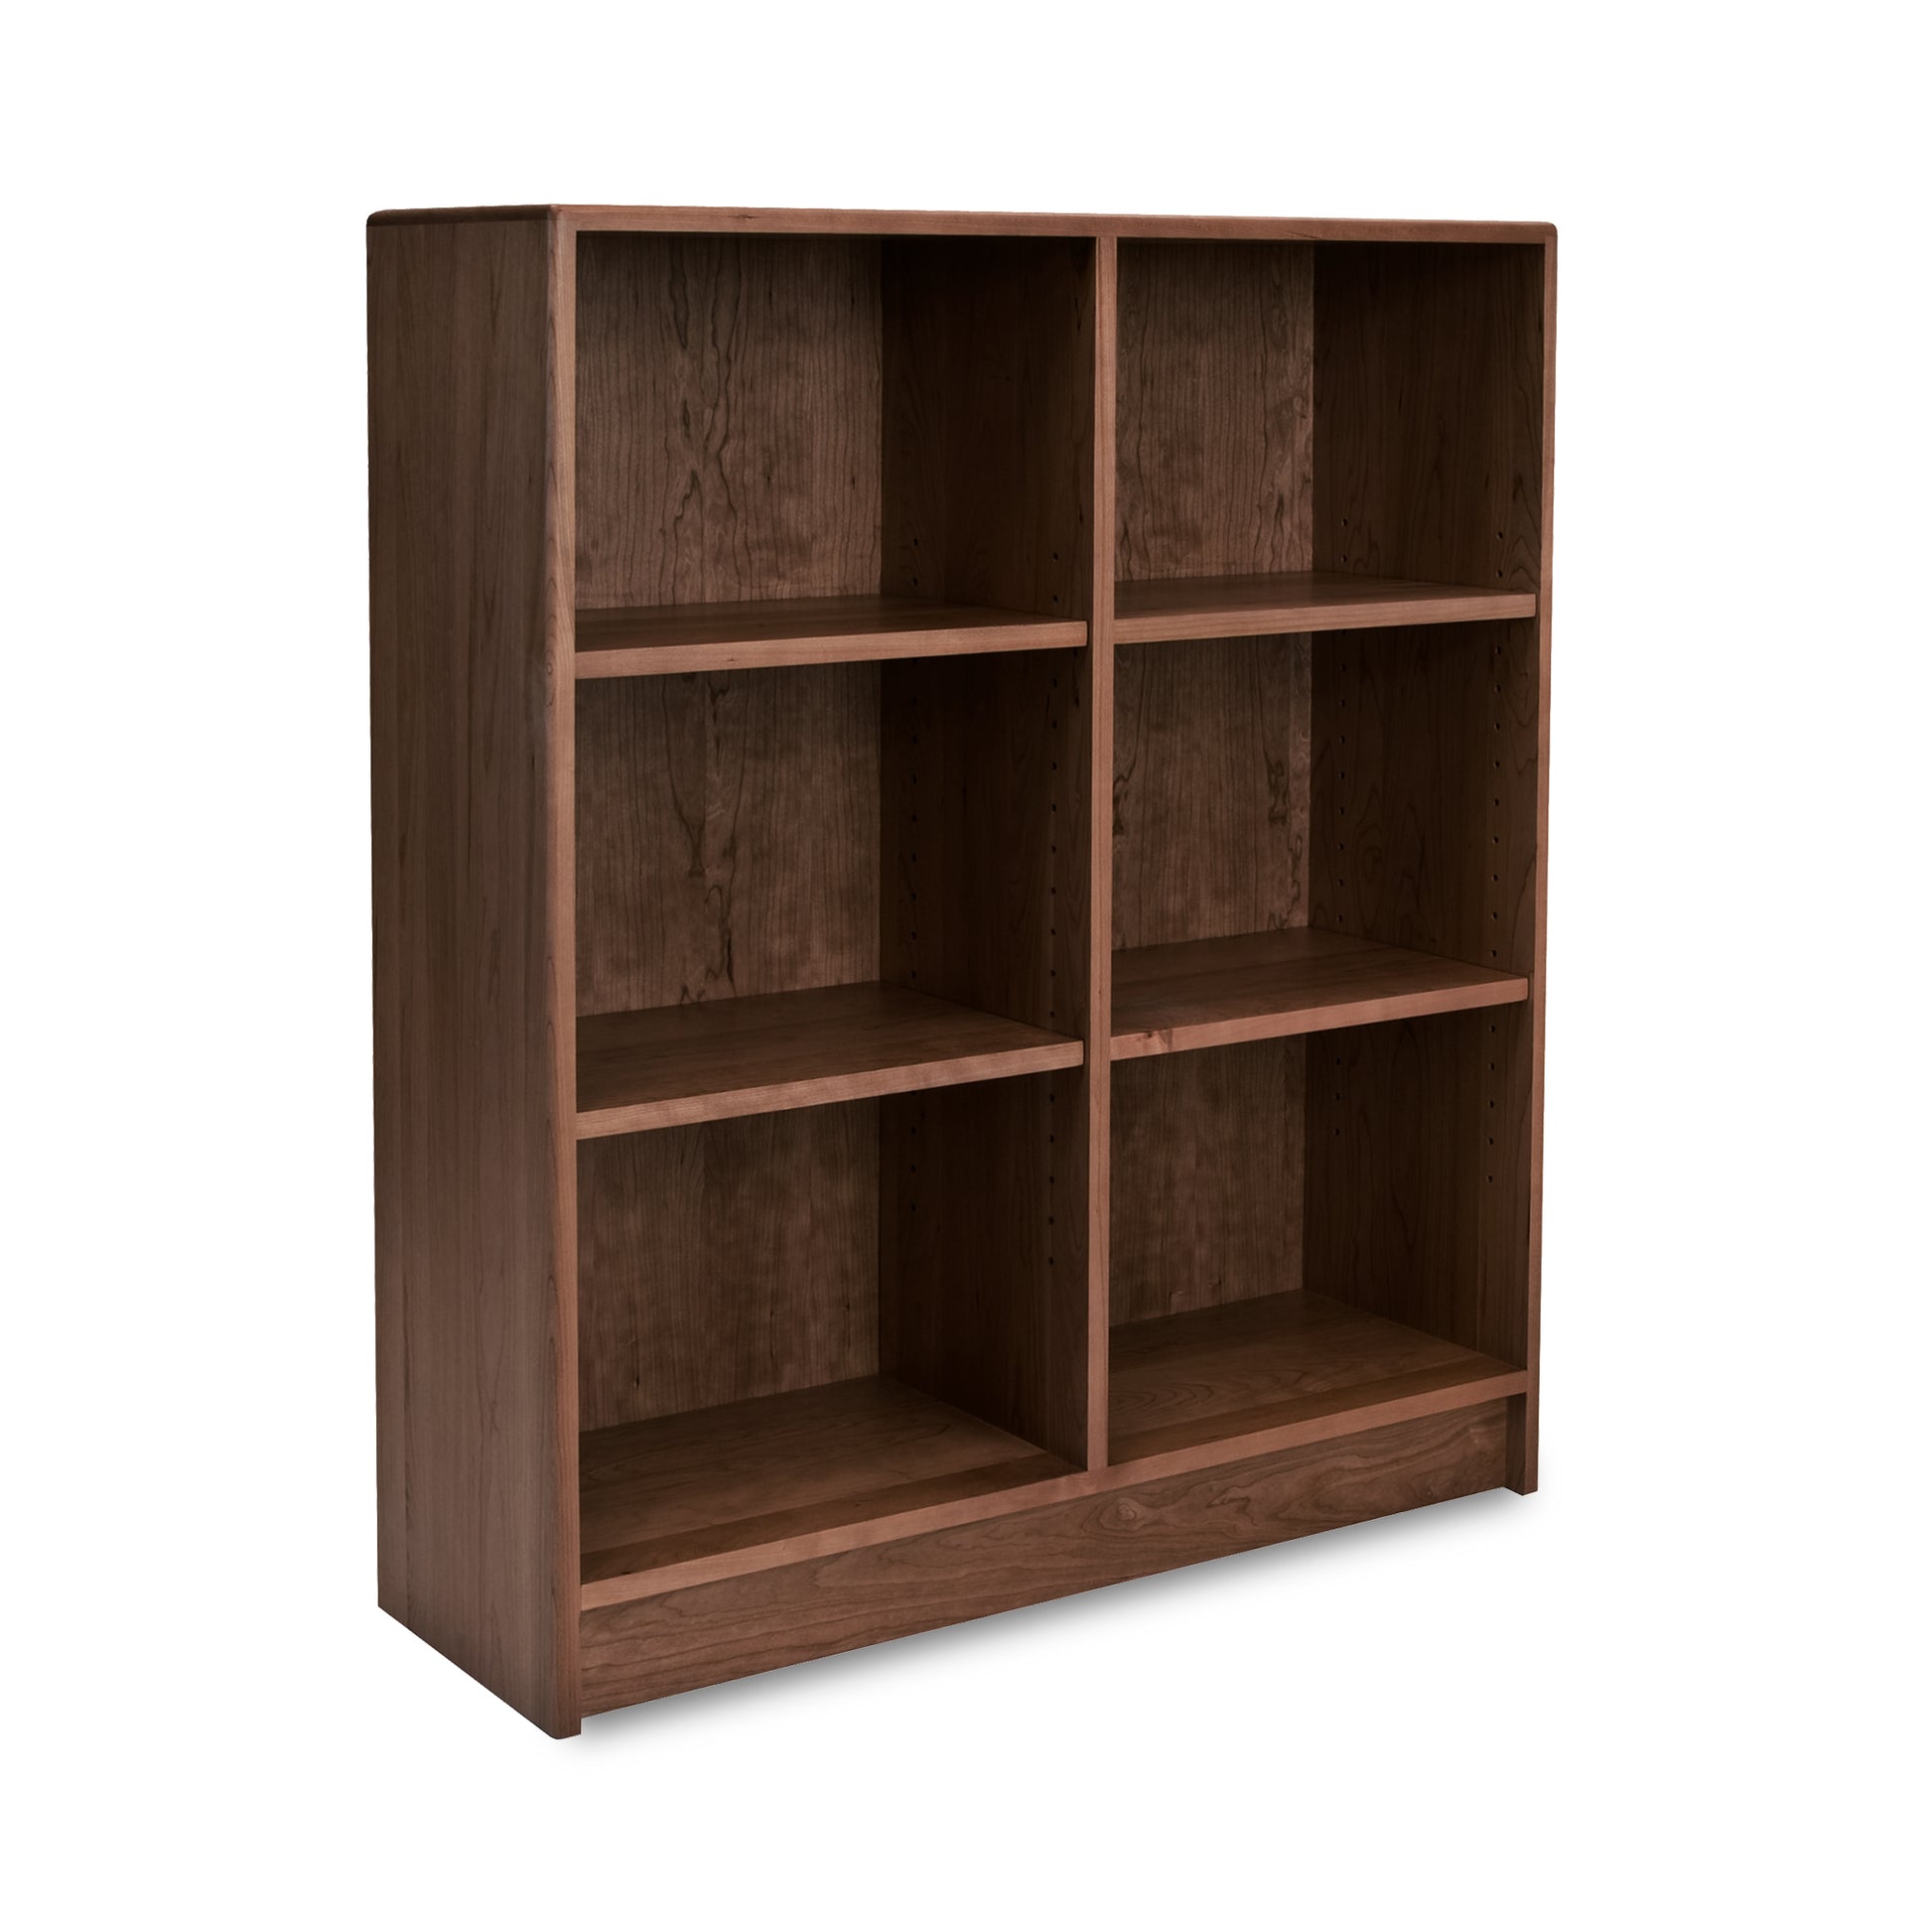 A luxurious "Contemporary Wide Bookcase" with four shelves made from hardwoods on a white background by Lyndon Furniture.